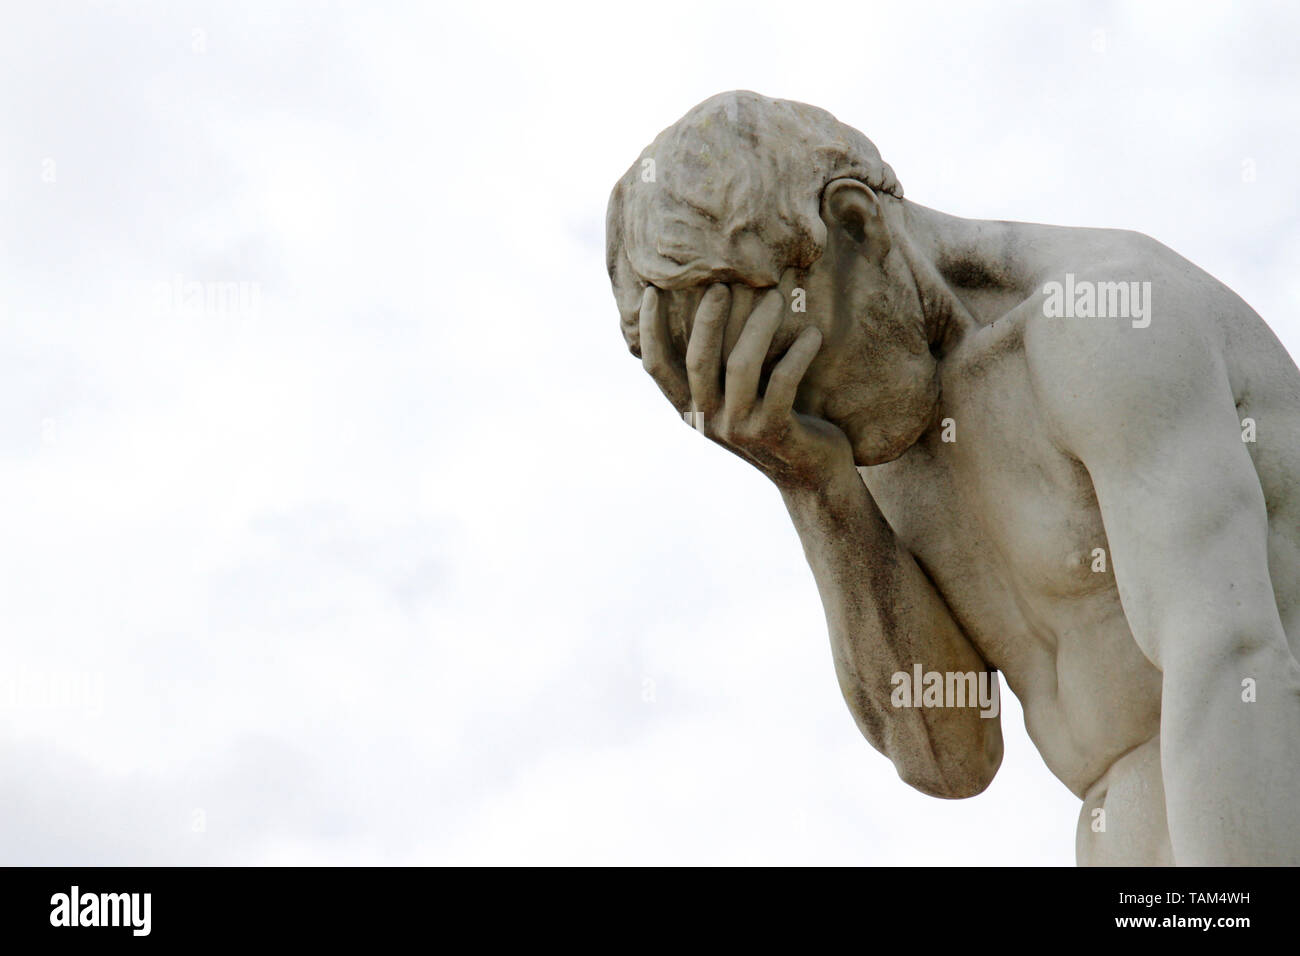 Facepalm - ashamed, sad, depressed. Statue with head in hand Stock Photo -  Alamy